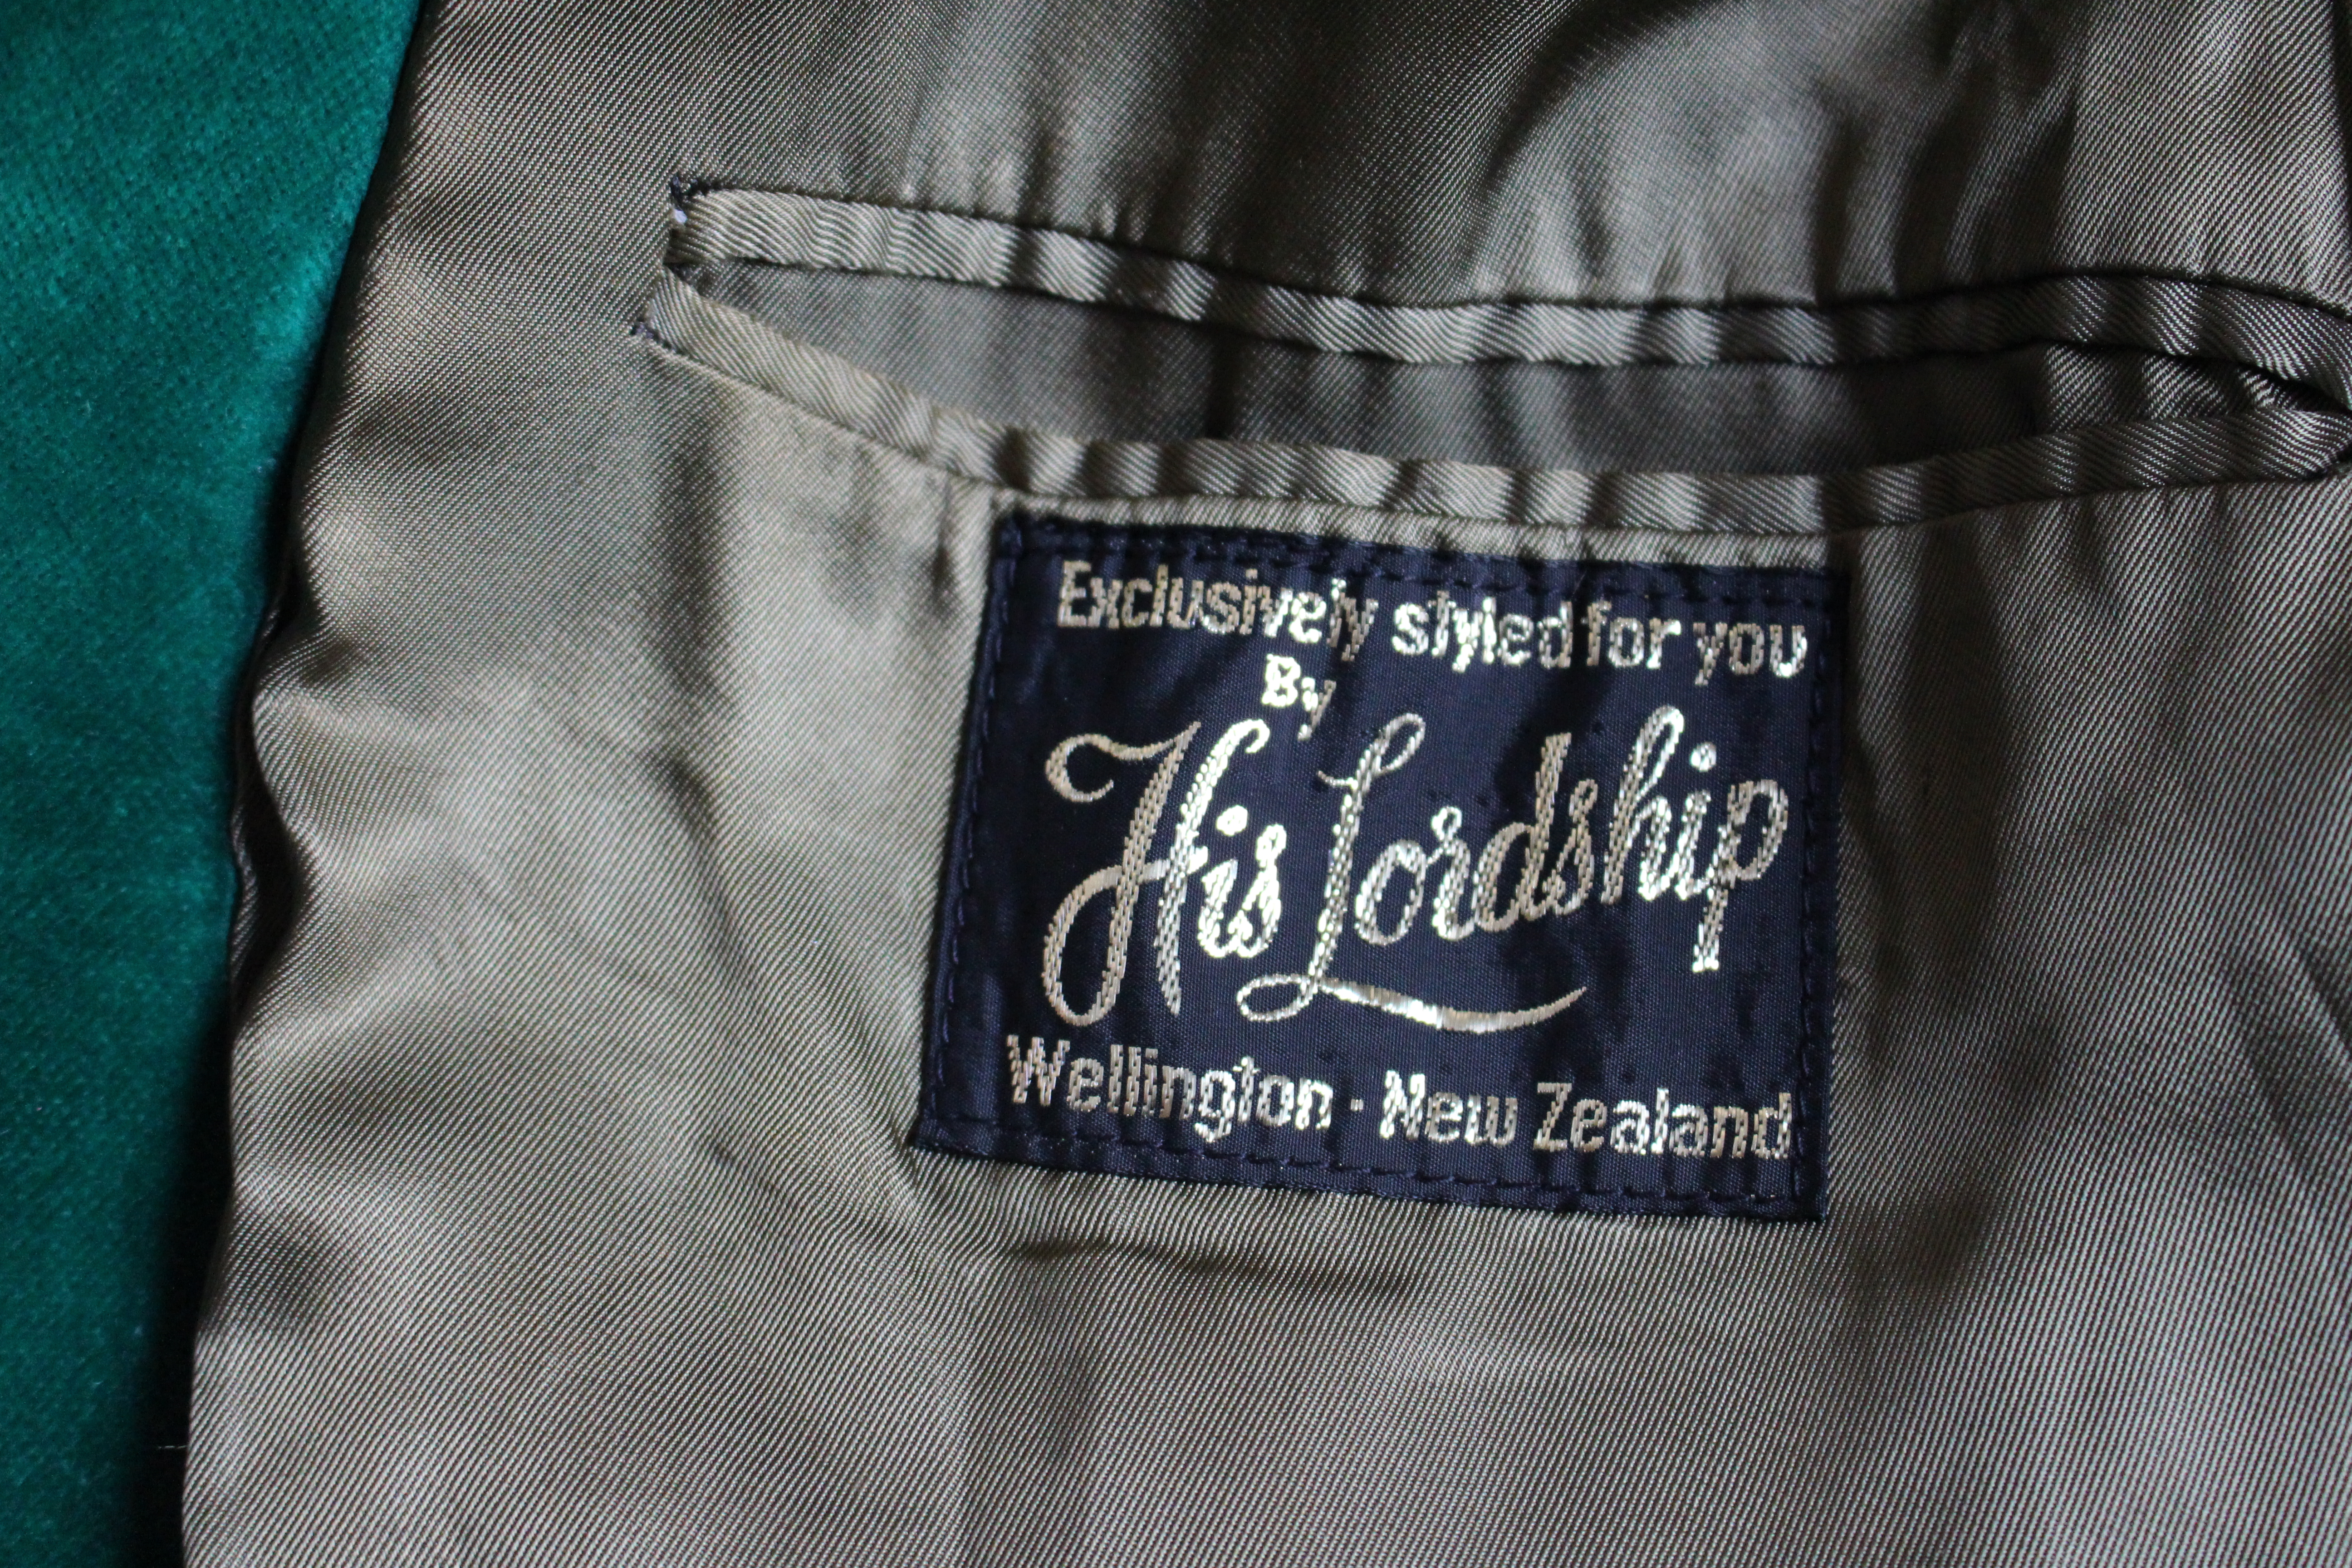 Label of light green velvet jacket, reading 'Exclusively styles for 
you by His Lordship, Wellington, New Zealand'